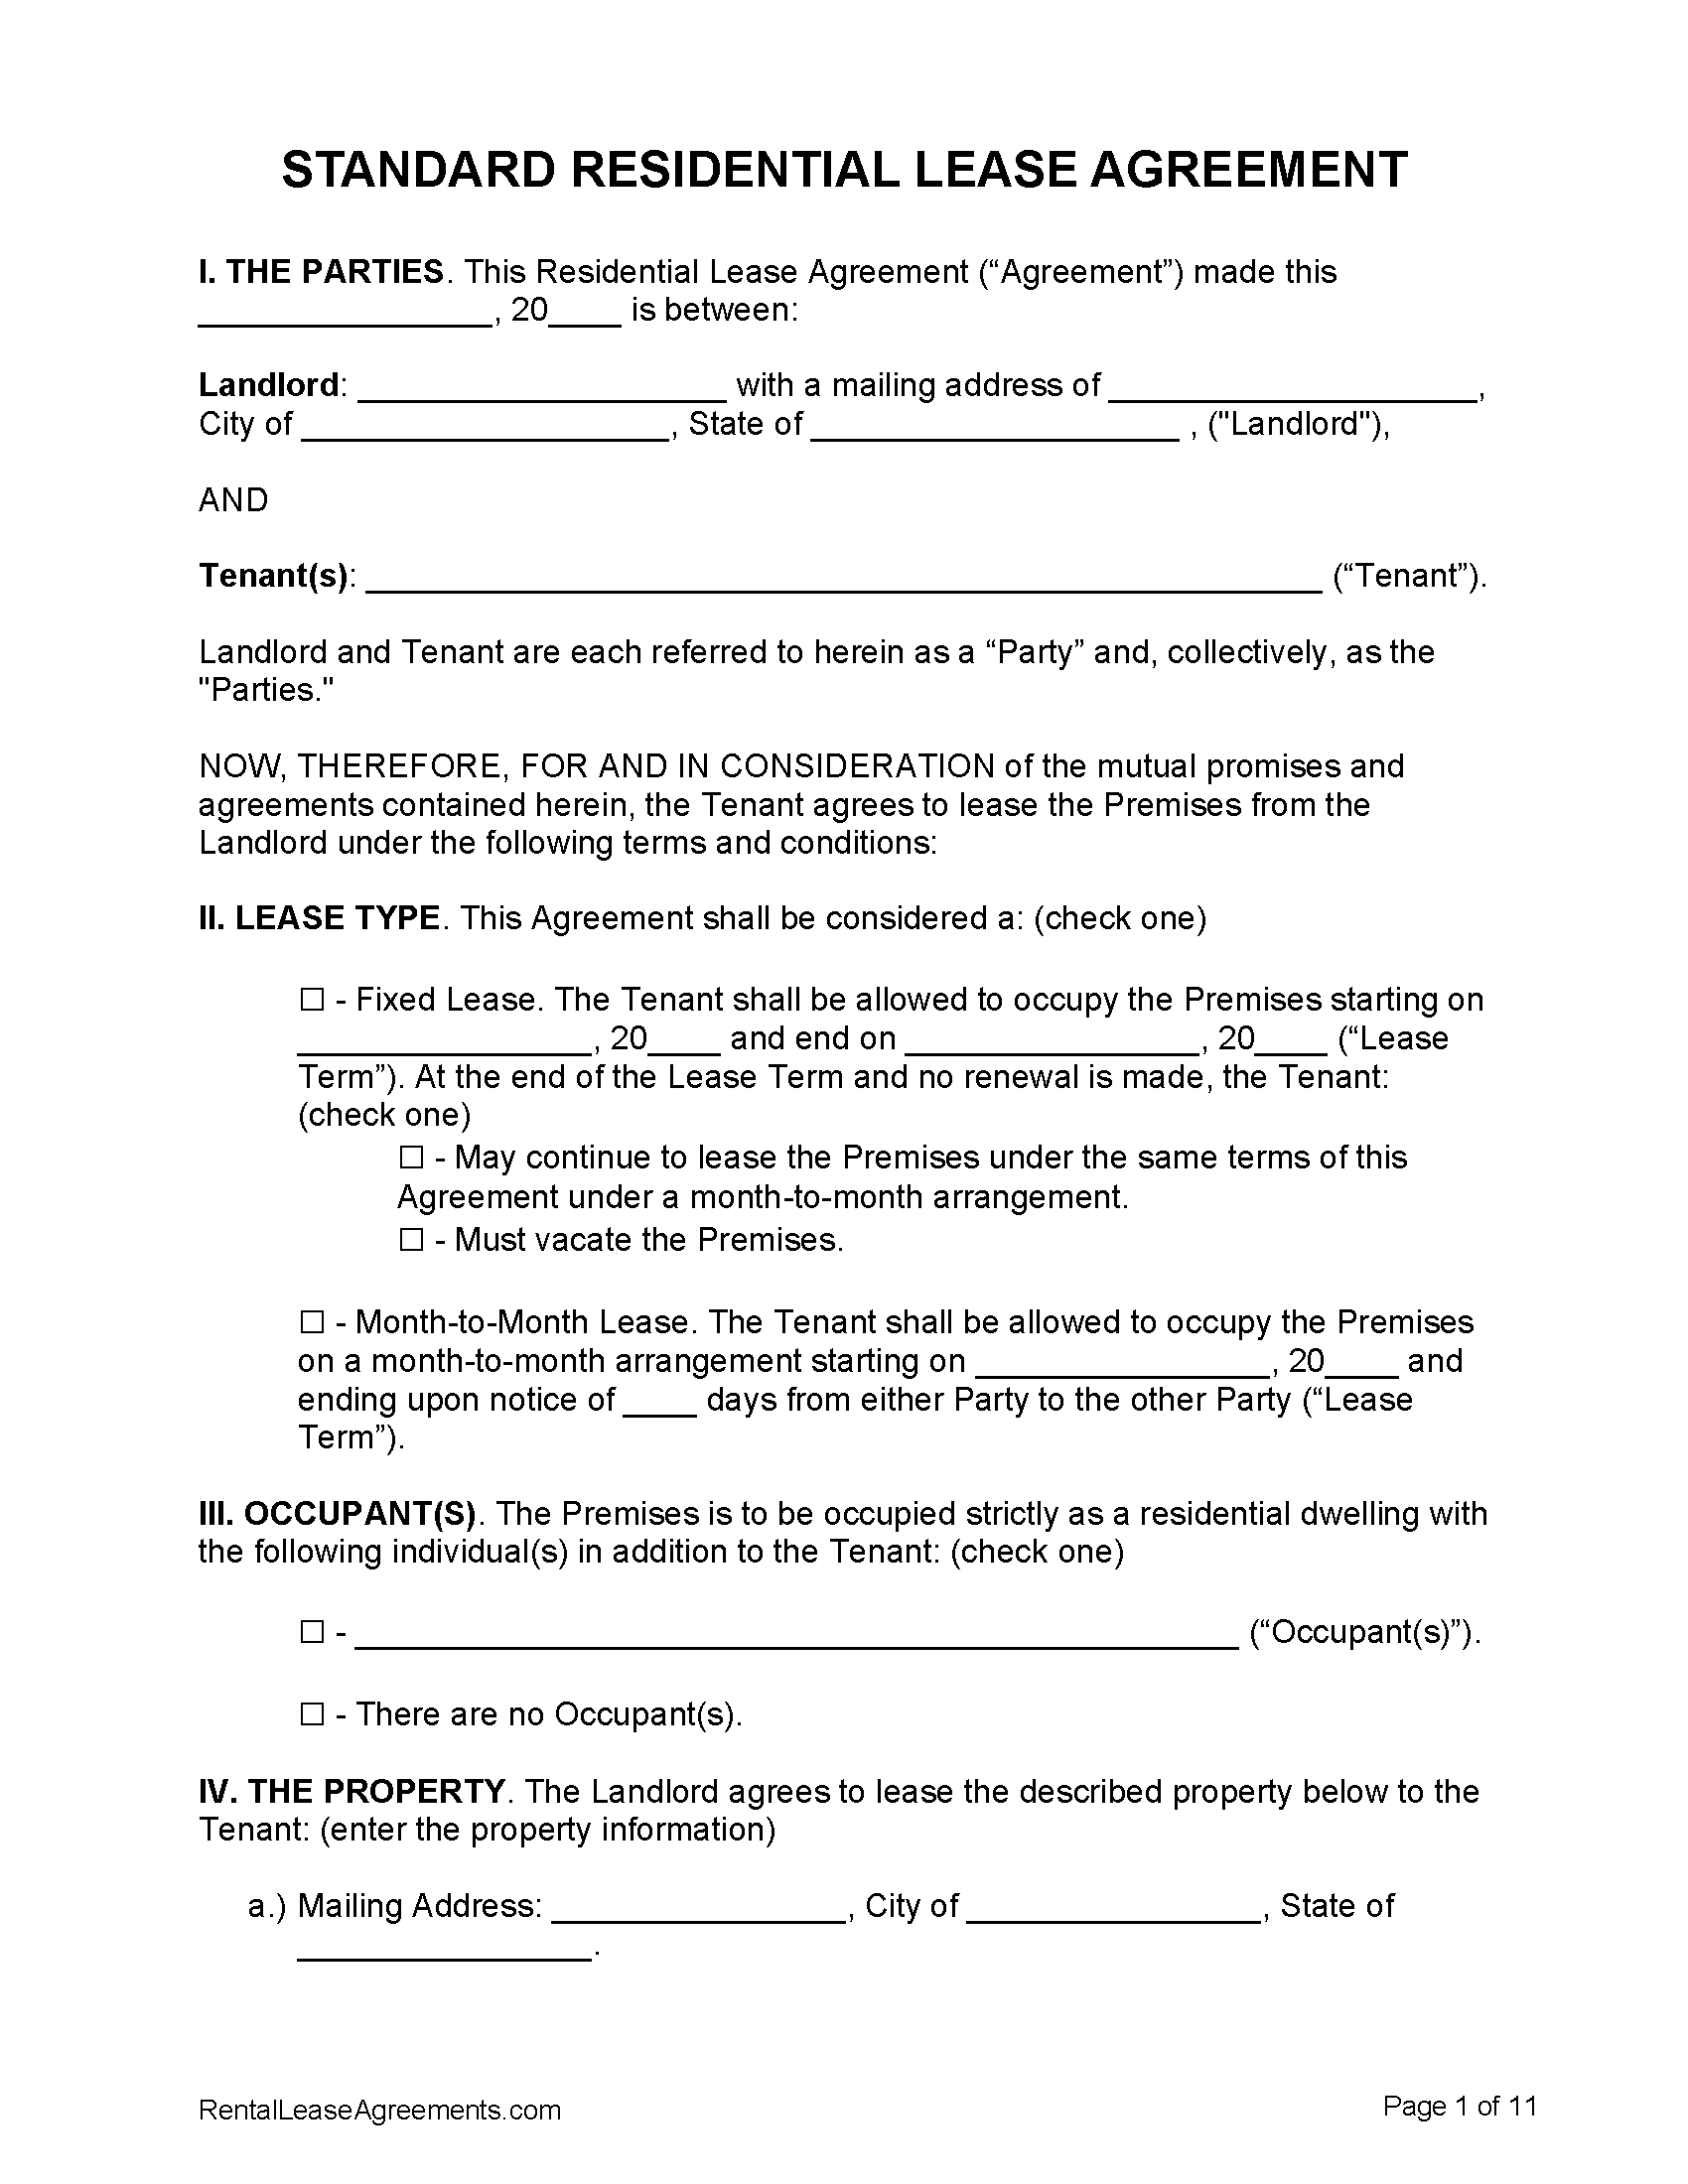 Free Lease Agreement Templates  PDF & Word Throughout free residential lease agreement template